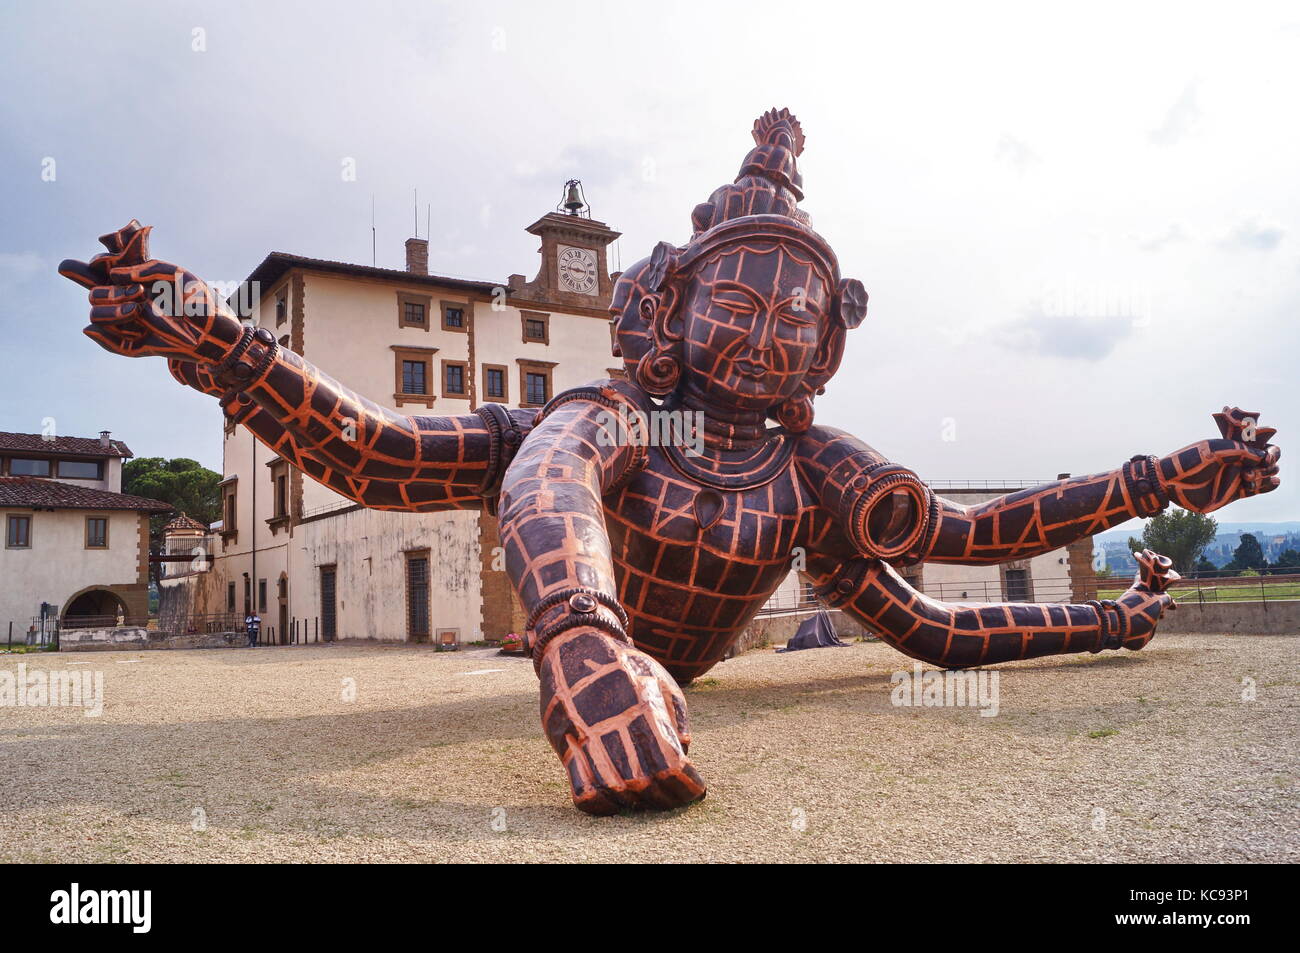 The sculpture entitled Three Heads Six Arms by Chinese artist Zhang Huan located in Forte di Belvedere Florence Italy Stock Photo